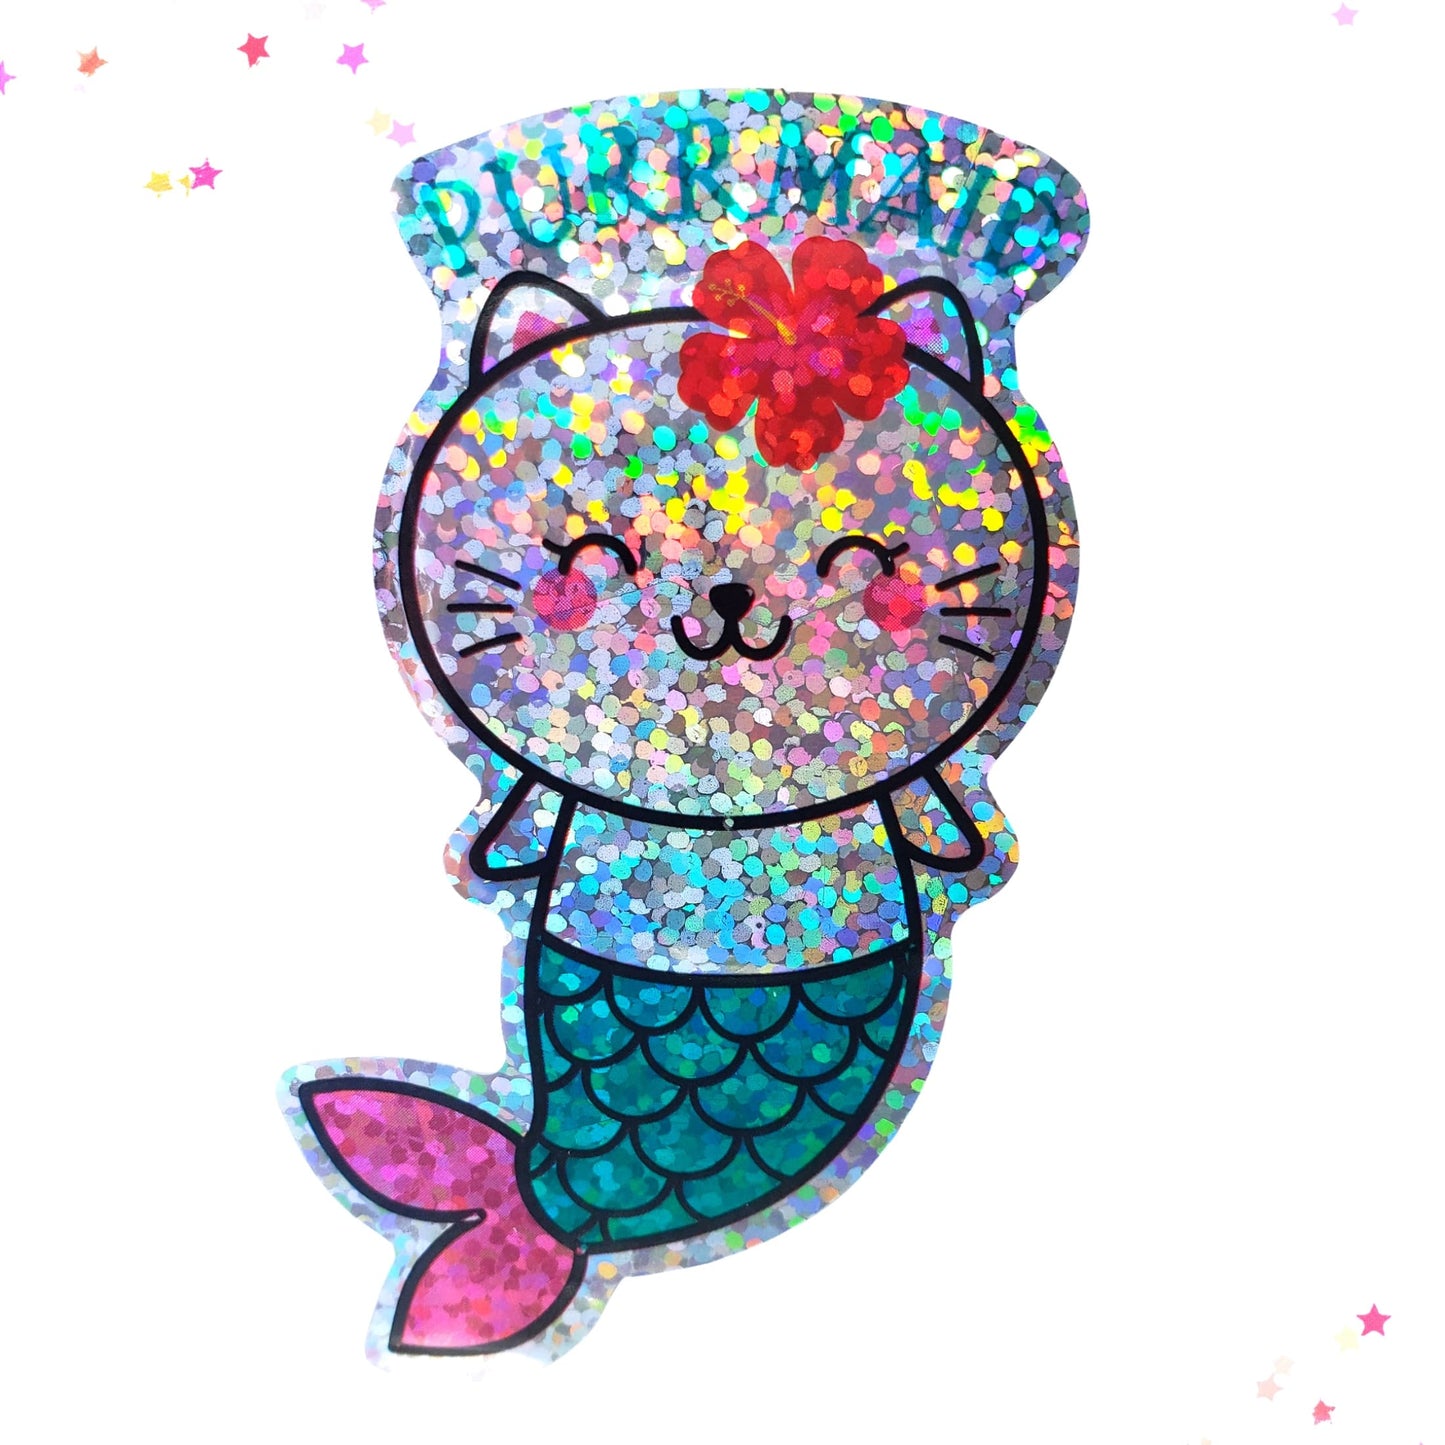 Premium Sticker - Sparkly Holographic Glitter Purrmaid Mermaid Cat from Confetti Kitty, Only 2.00